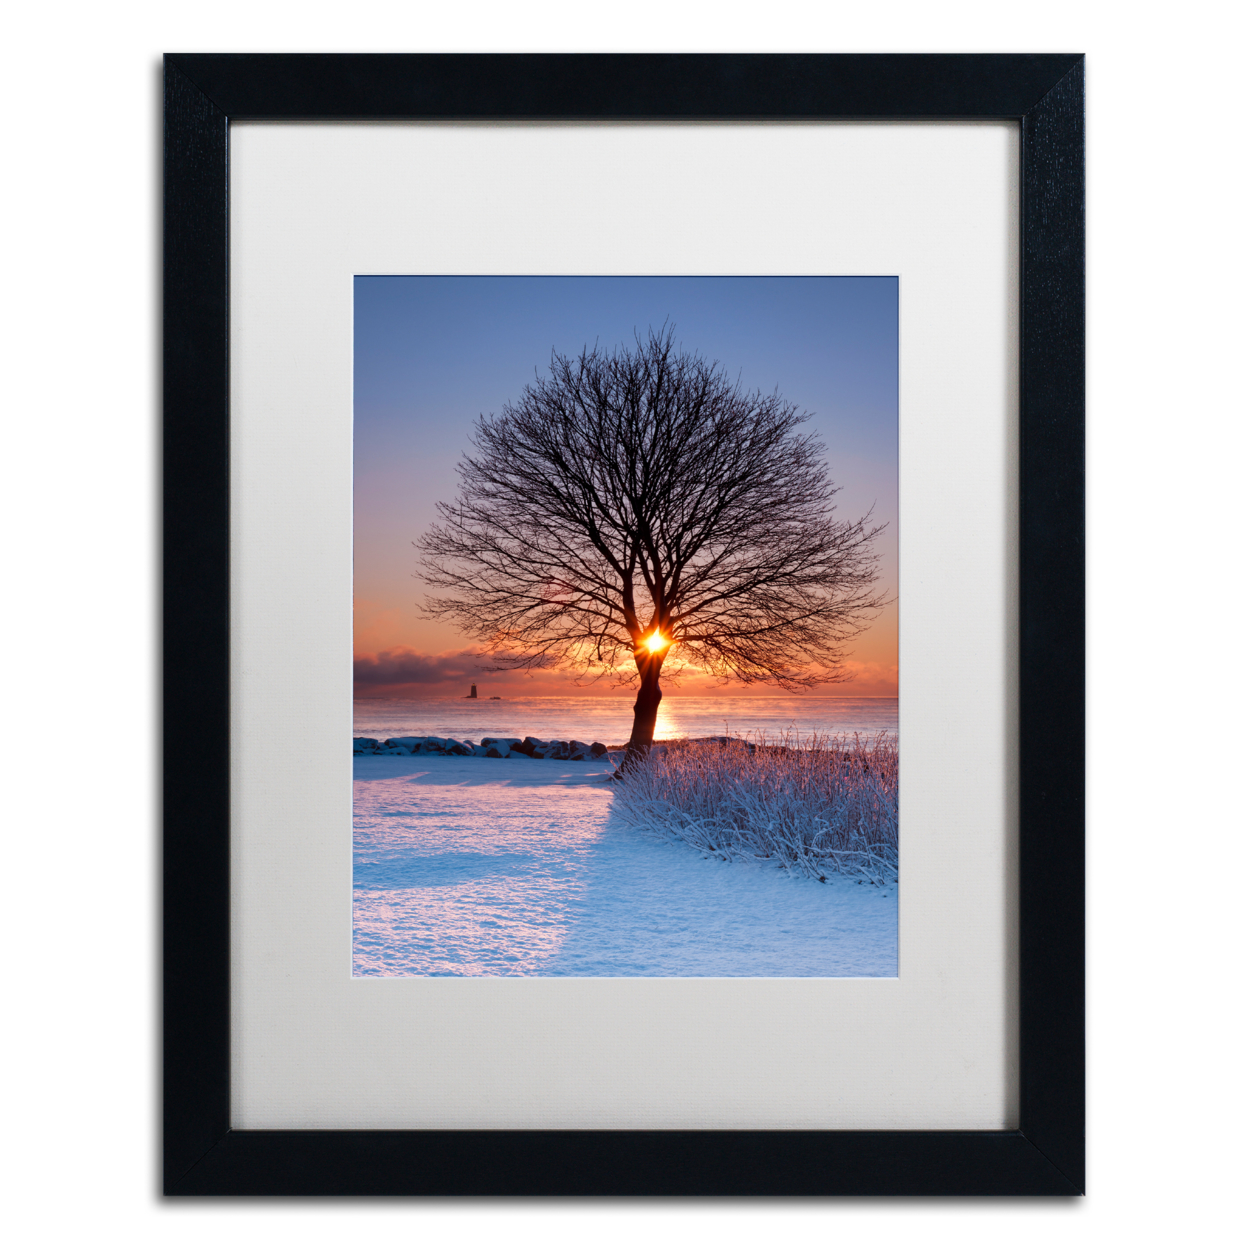 Michael Blanchette Photography 'Sun In Tree' Black Wooden Framed Art 18 X 22 Inches